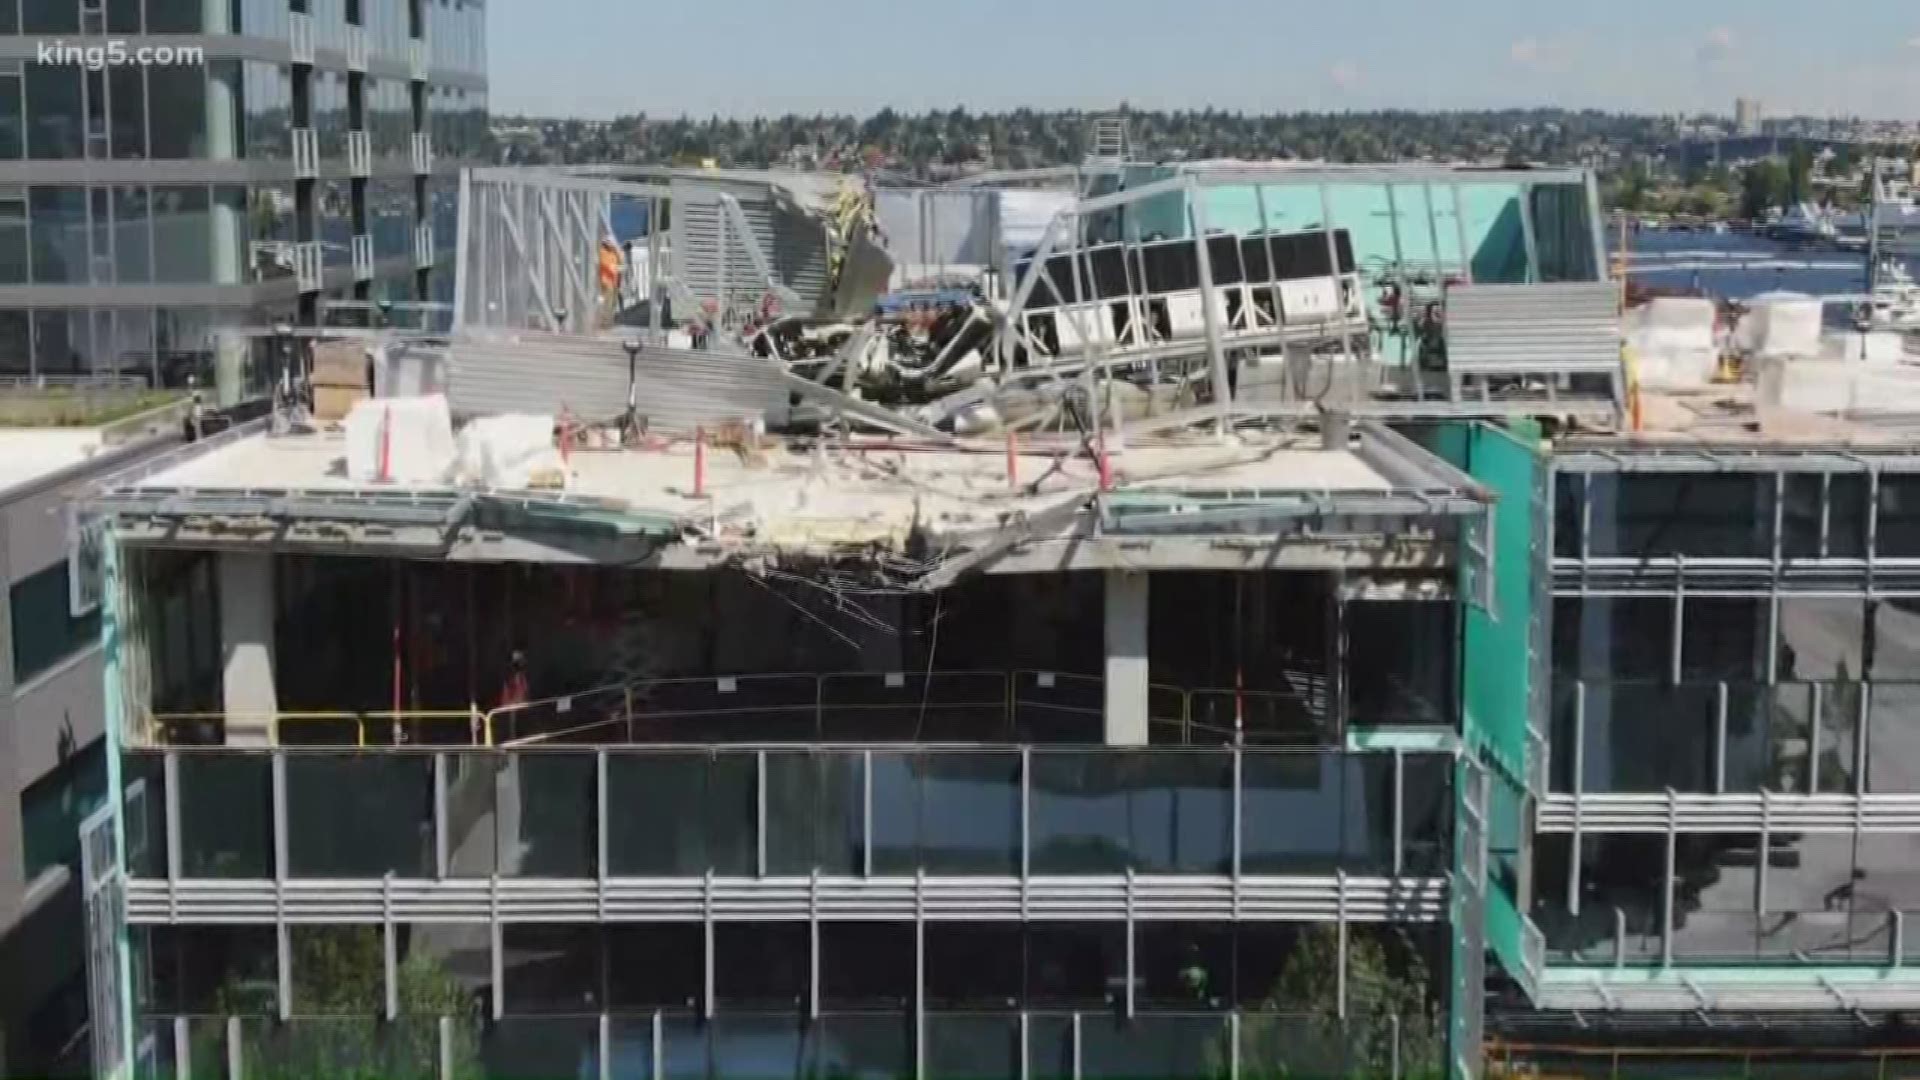 Two people died when a tower crane collapsed Saturday. Seattle Department of Transportation records show that Omega Morgan, one of five companies now being investigated, only asked for Valley street to be closed during the removal. KING 5's Chris Daniels reports.